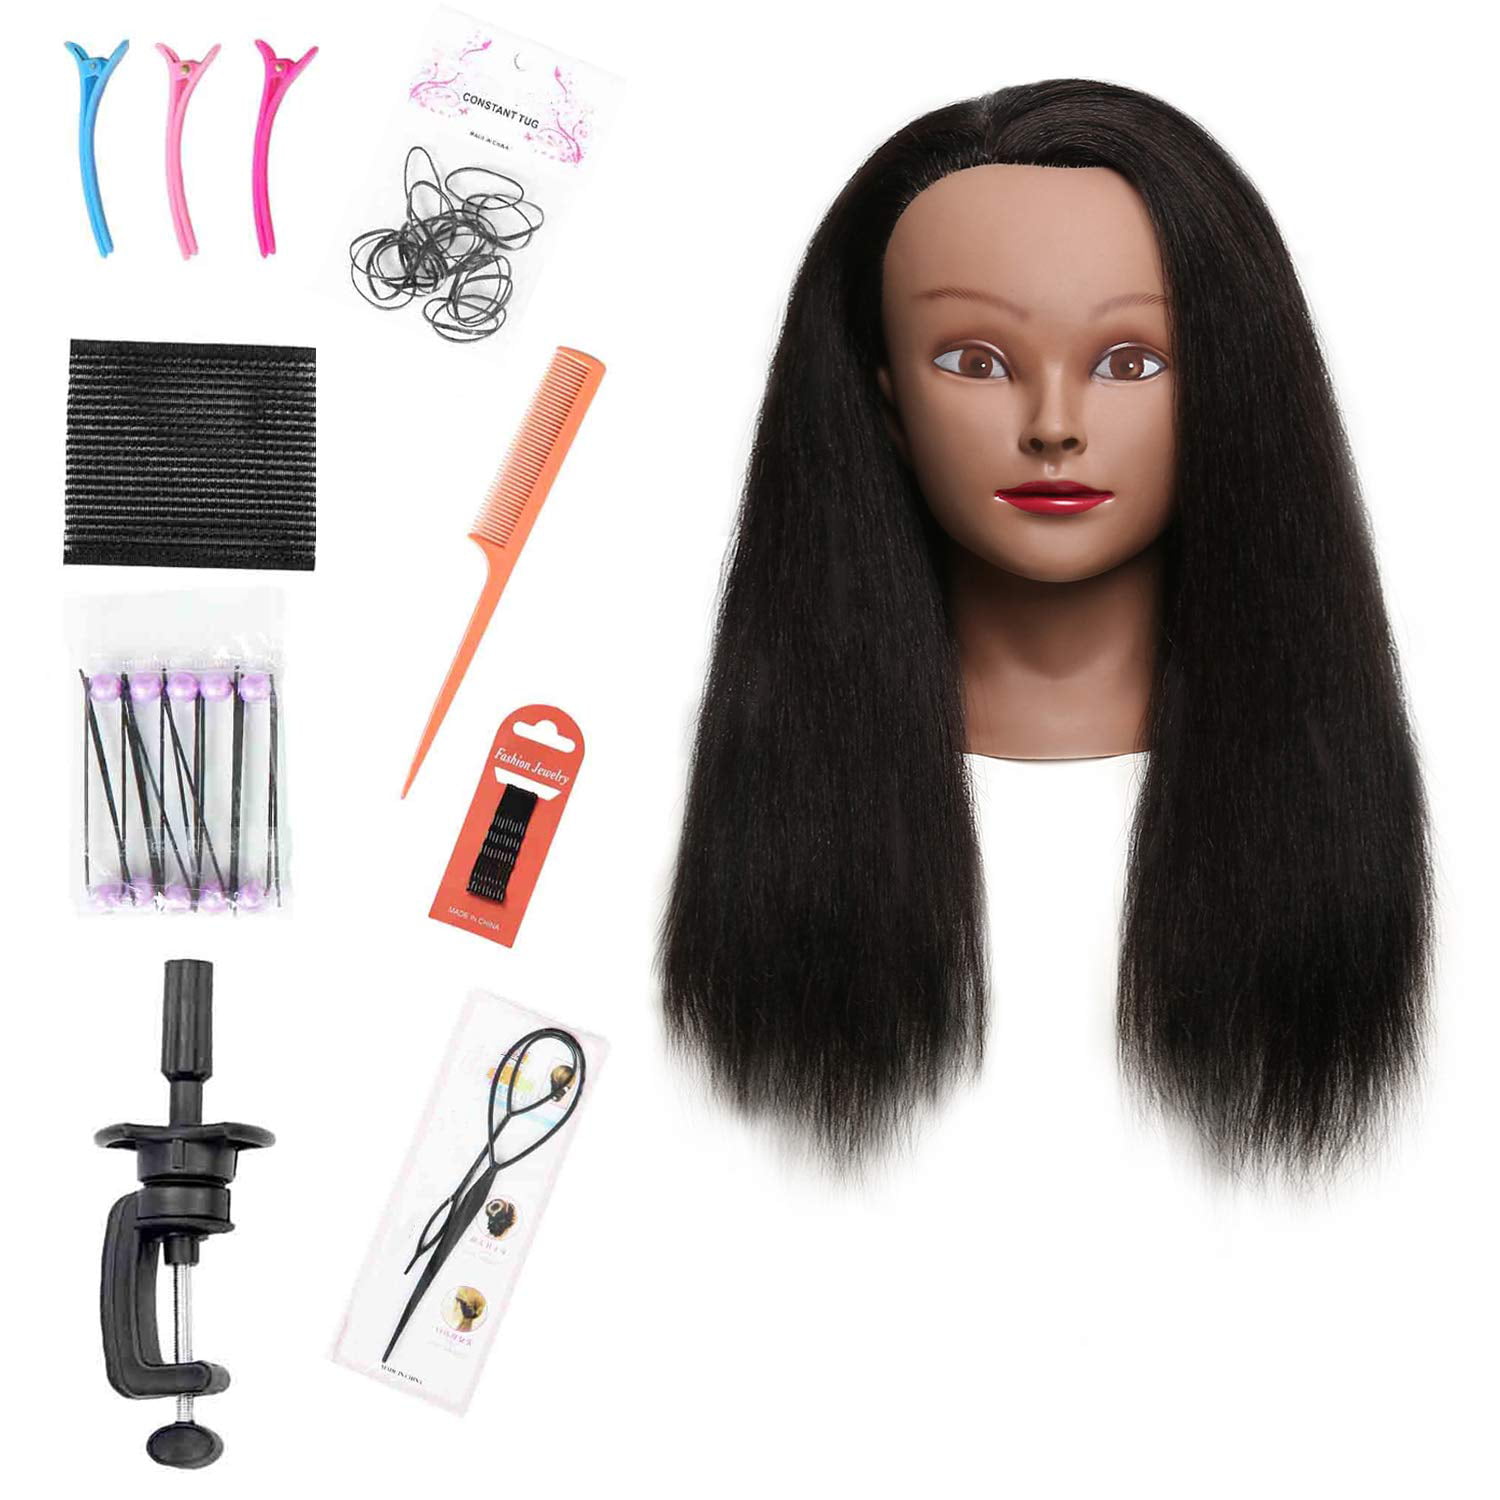  Mannequin Head with 100% Real Hair Hairdresser Practice  Braiding Styling Cosmetology Doll Training Head for Bleaching Dyeing  Curling Cutting Updos Styling and Free Clamp Holder (M natural black 022) 